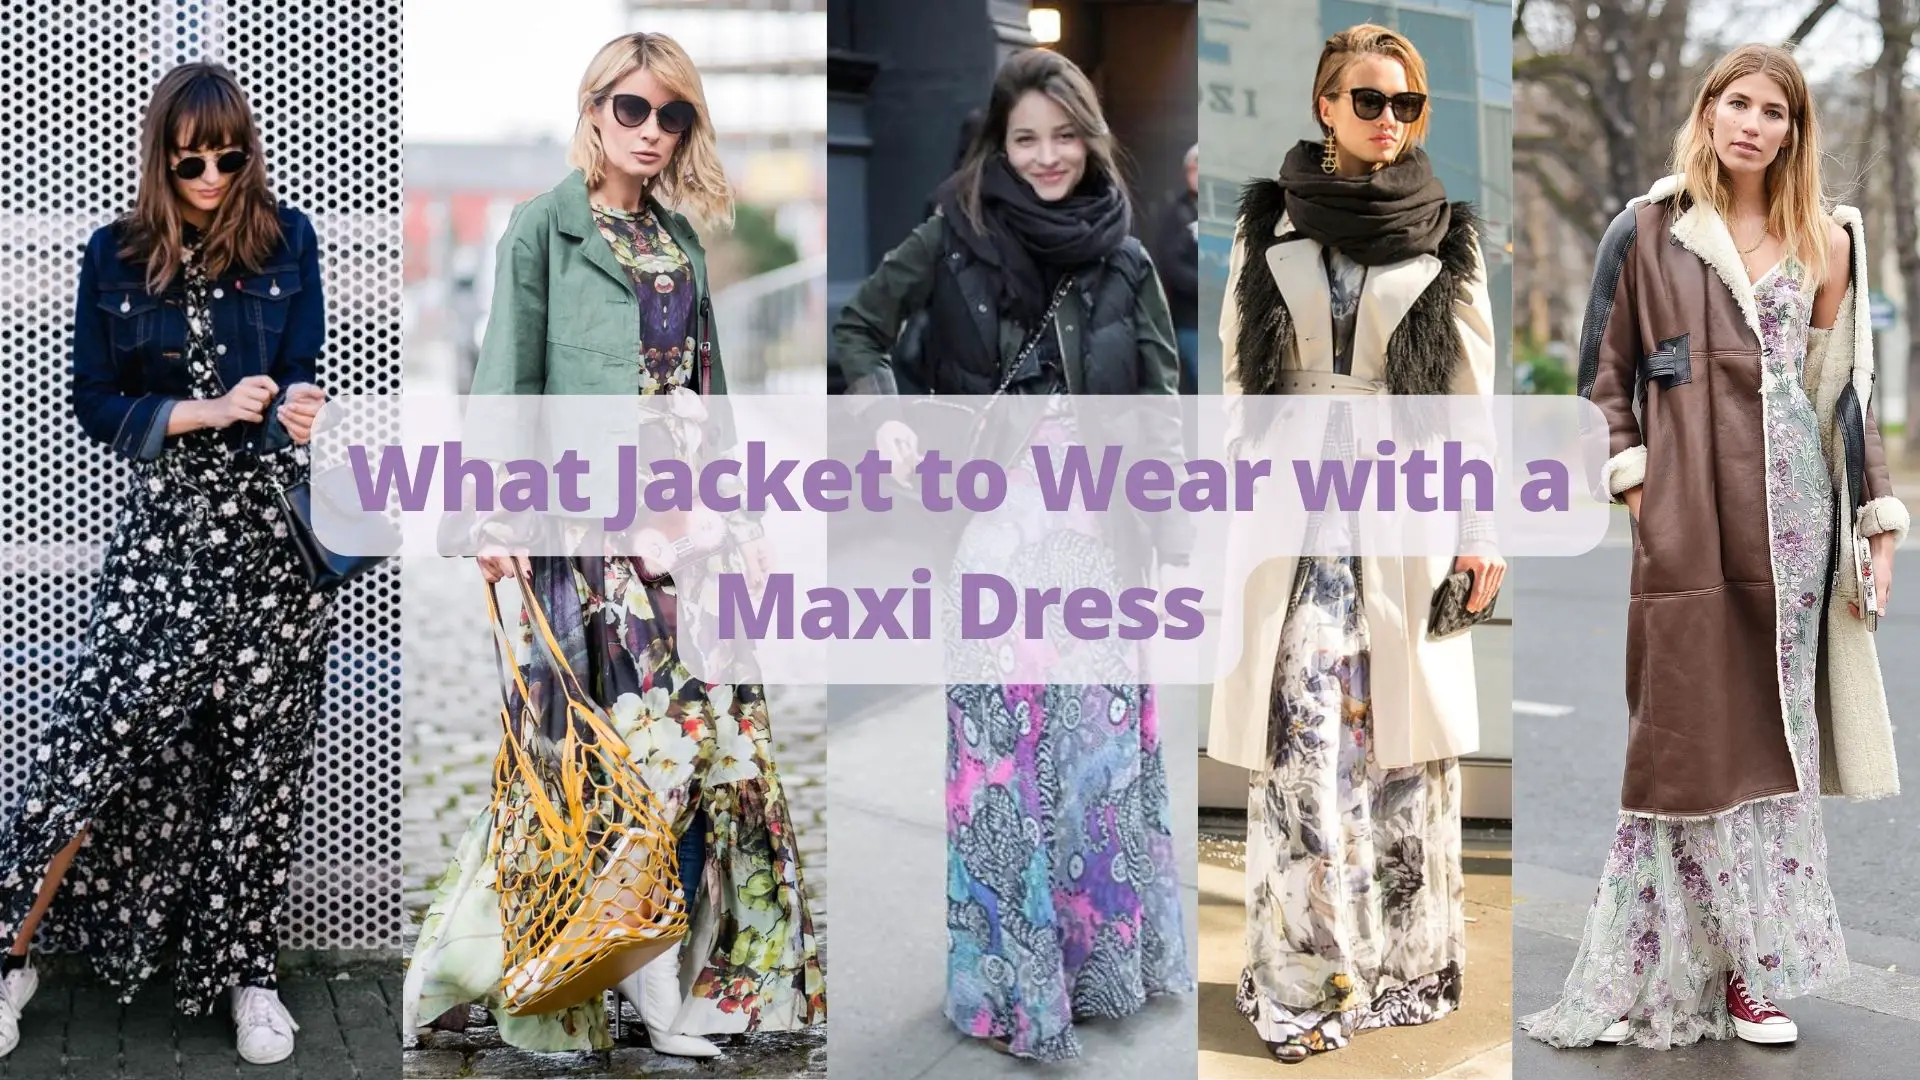 What Jacket to Wear with a Maxi Dress